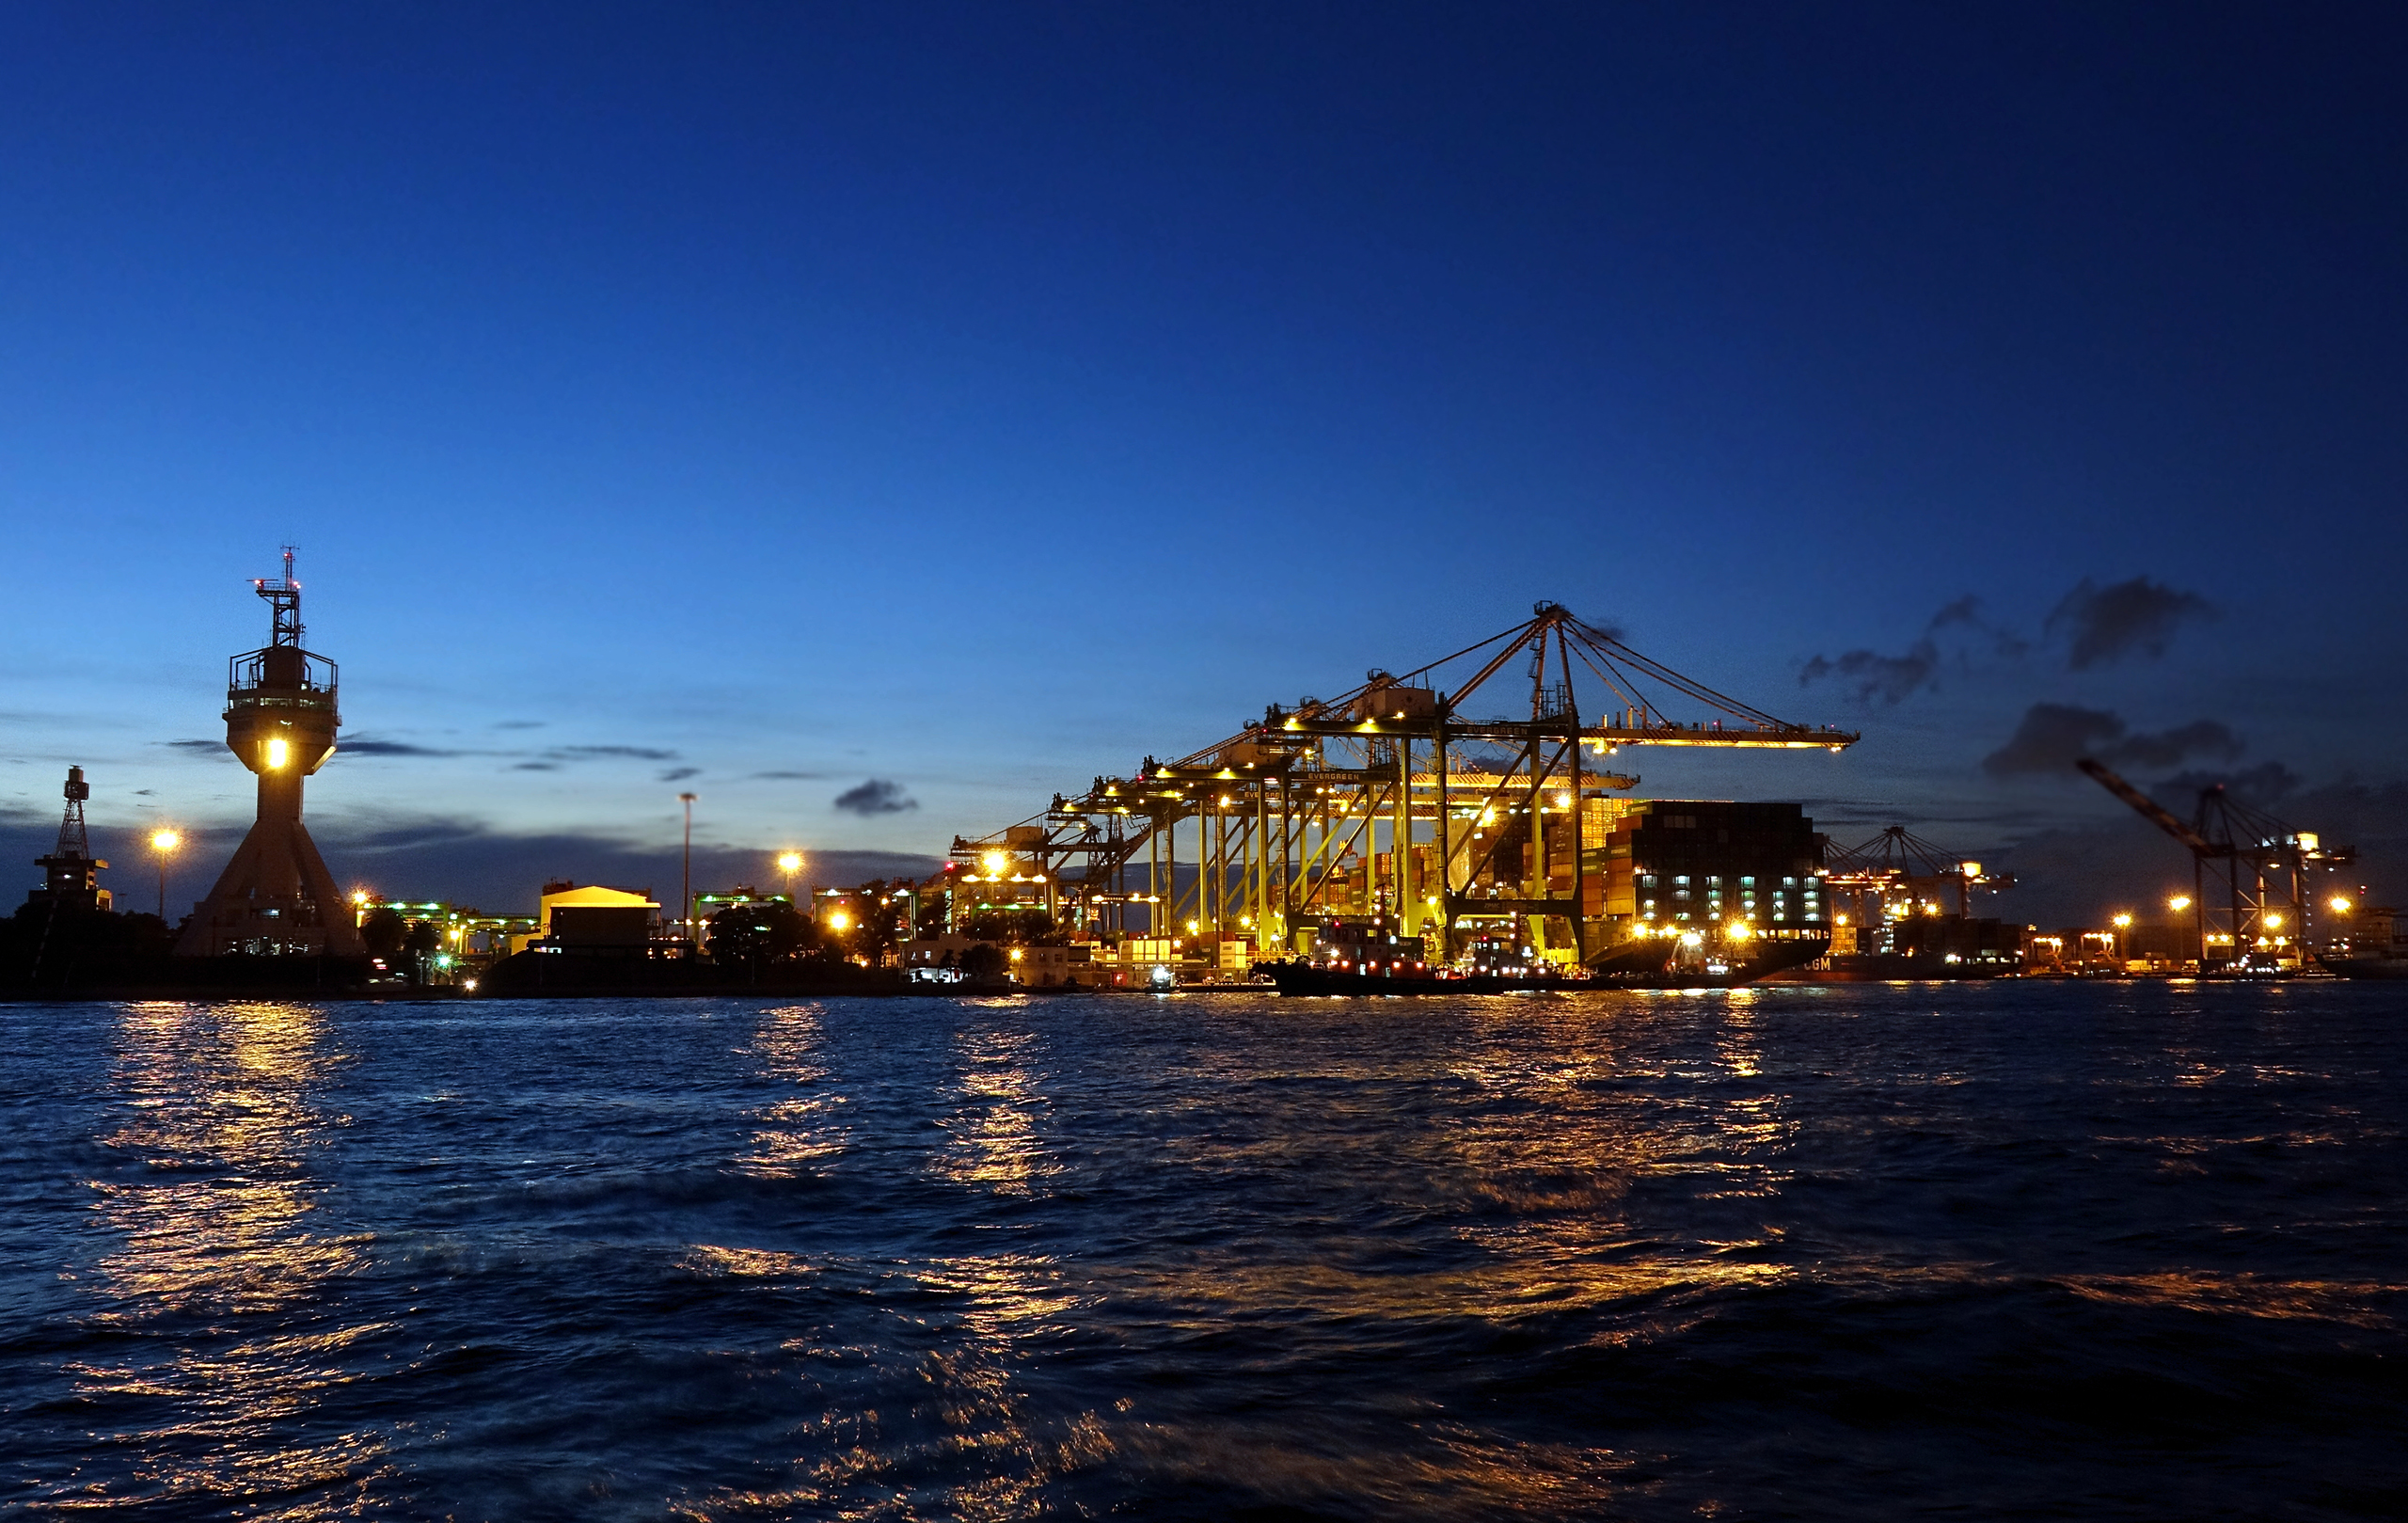 kaohsiung_taiwan_-_june_2_2019-_a_view_of_the_busy_kaohsiung_container_shipment_port_at_evening_time.jpg